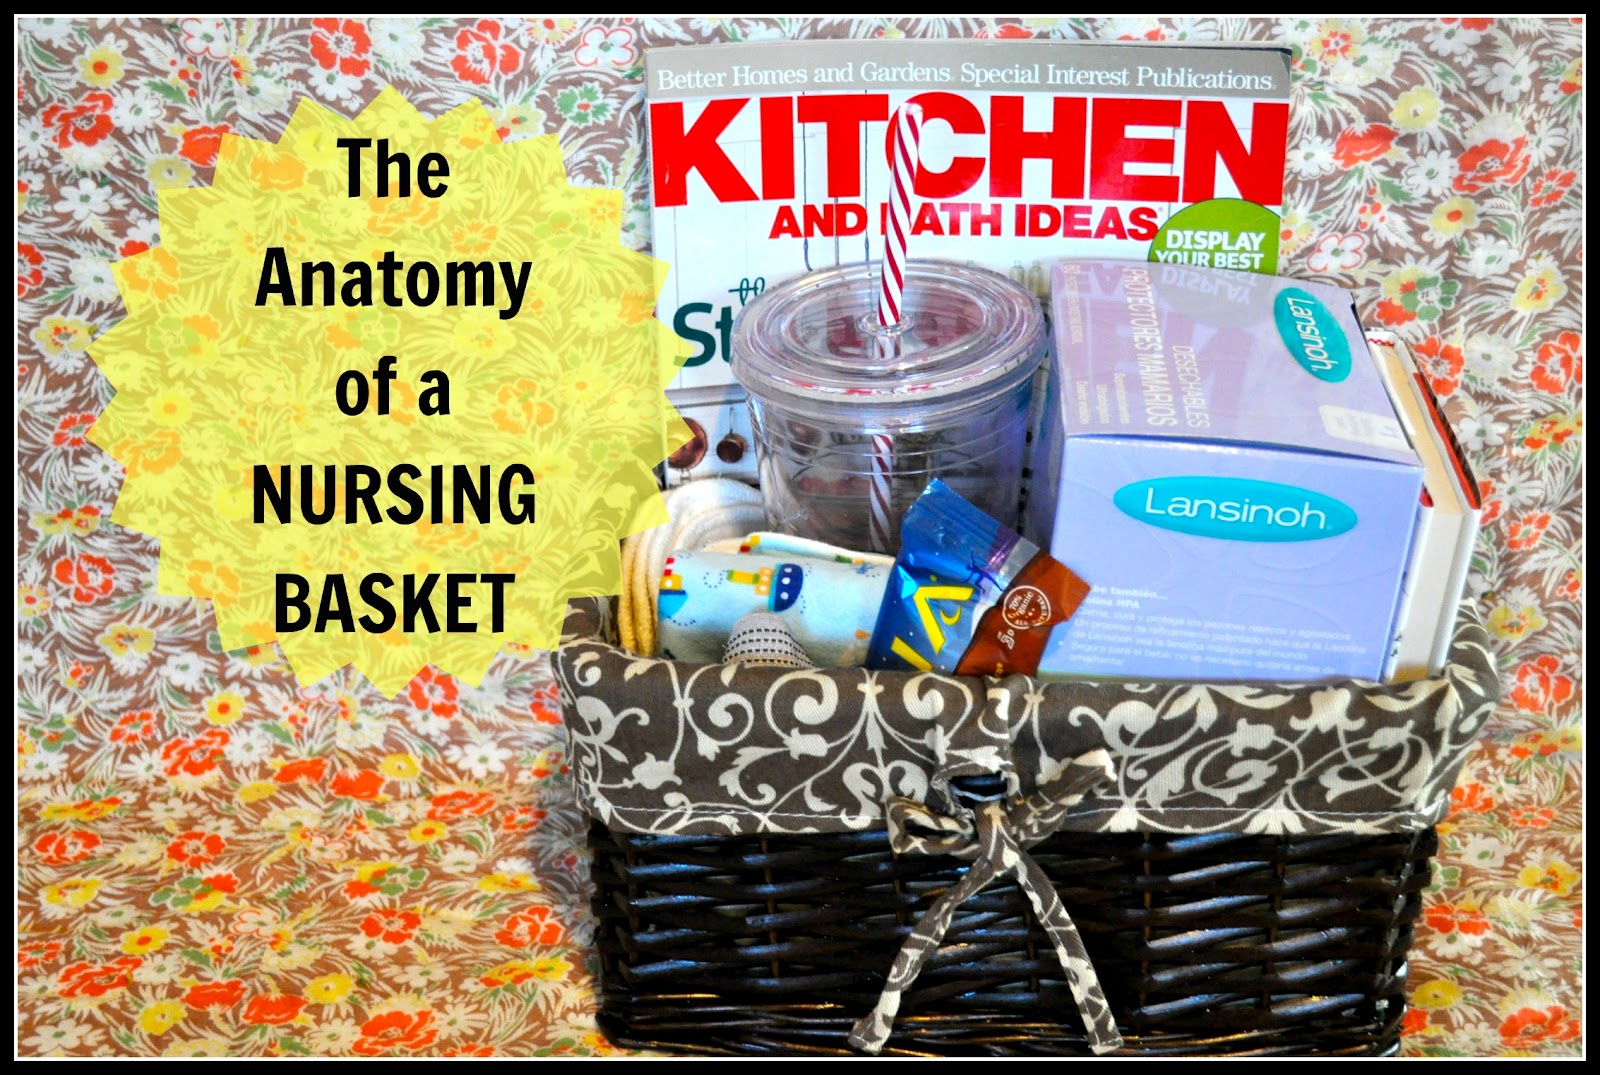 Being Frugal and Making It Work: The Anatomy of a Nursing Basket - Must